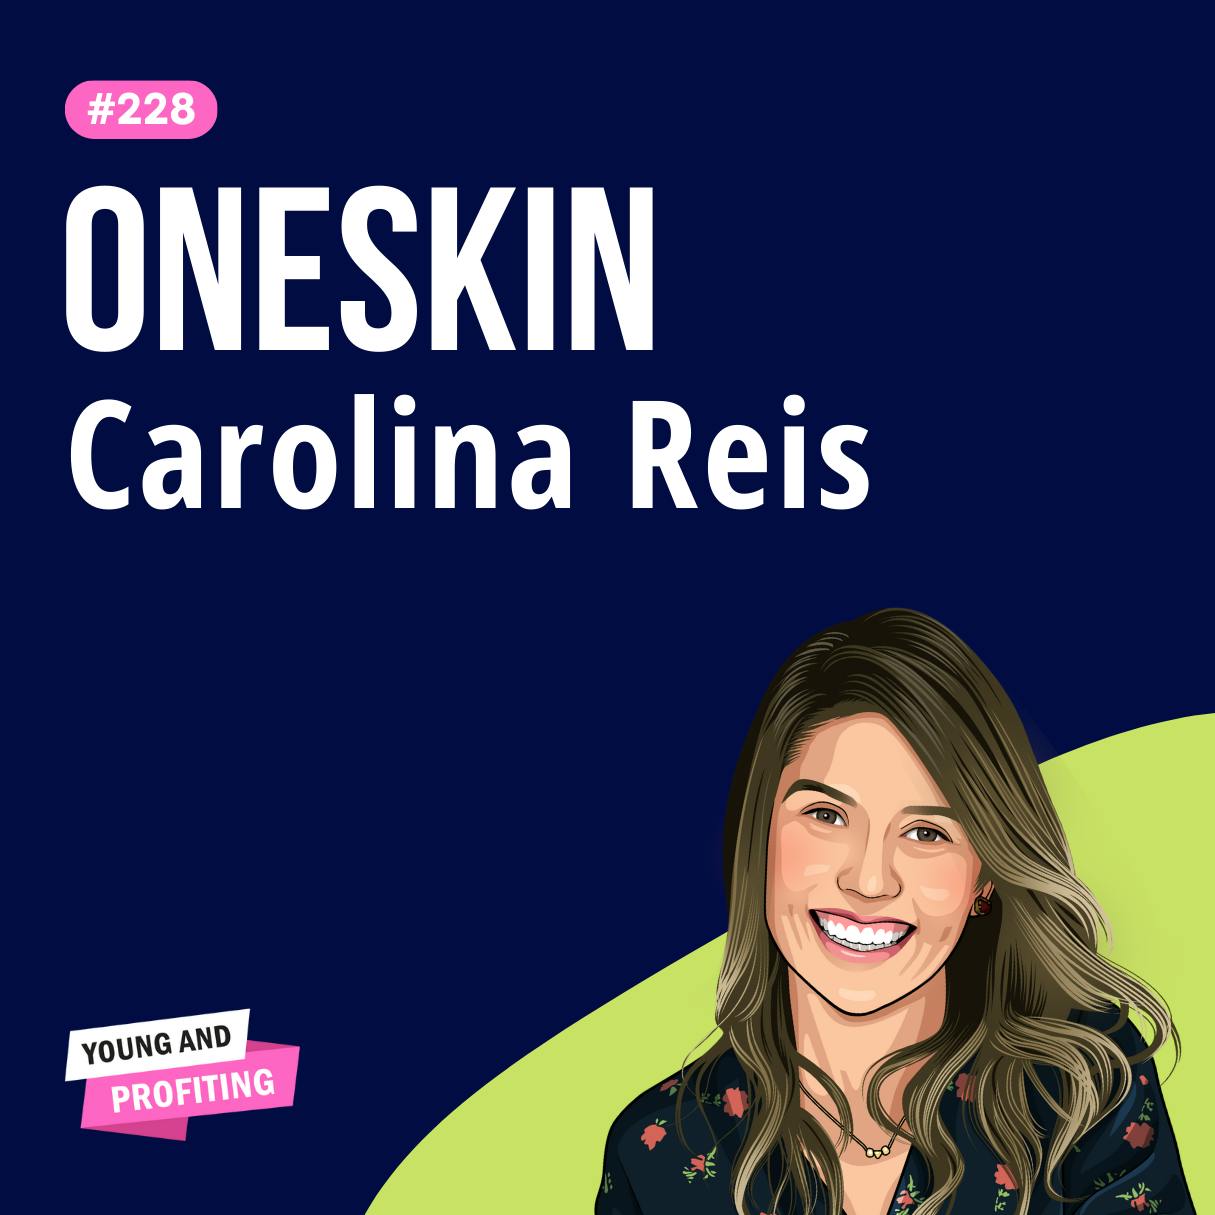 Carolina Reis: Reverse Your Biological Age and Increase Your Longevity With These Pro-Aging Hacks! | E228 by Hala Taha | YAP Media Network